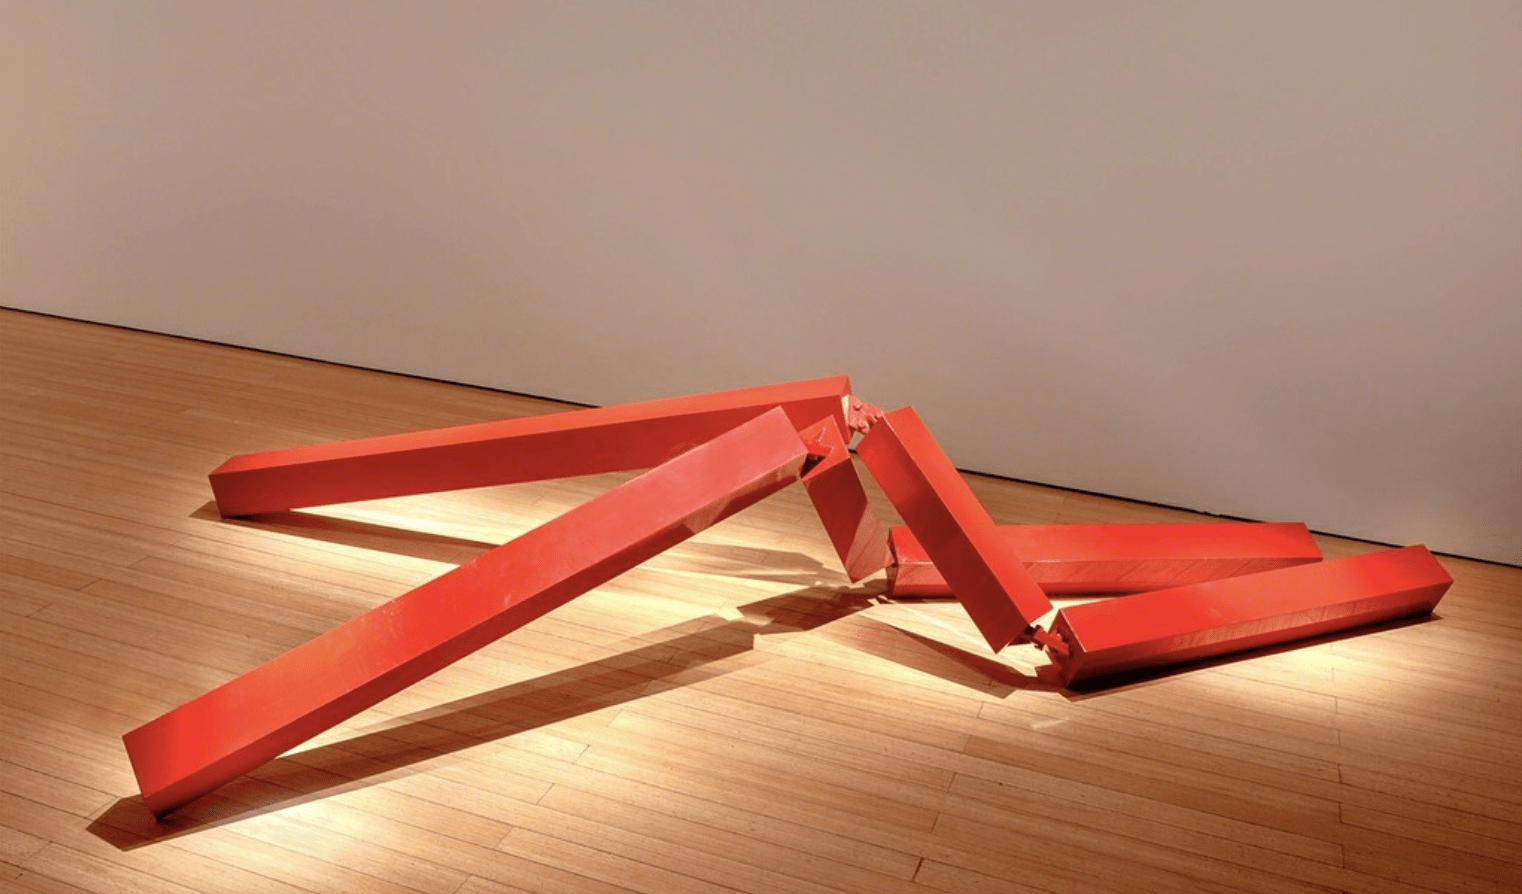 John Henry

Zig Zag 11, 2010

machined aluminum painted red

2&amp;rsquo;7&amp;rdquo;H x 15&amp;rsquo;8&amp;rdquo;L x 4&amp;rsquo;D
dimensions variable

JH018